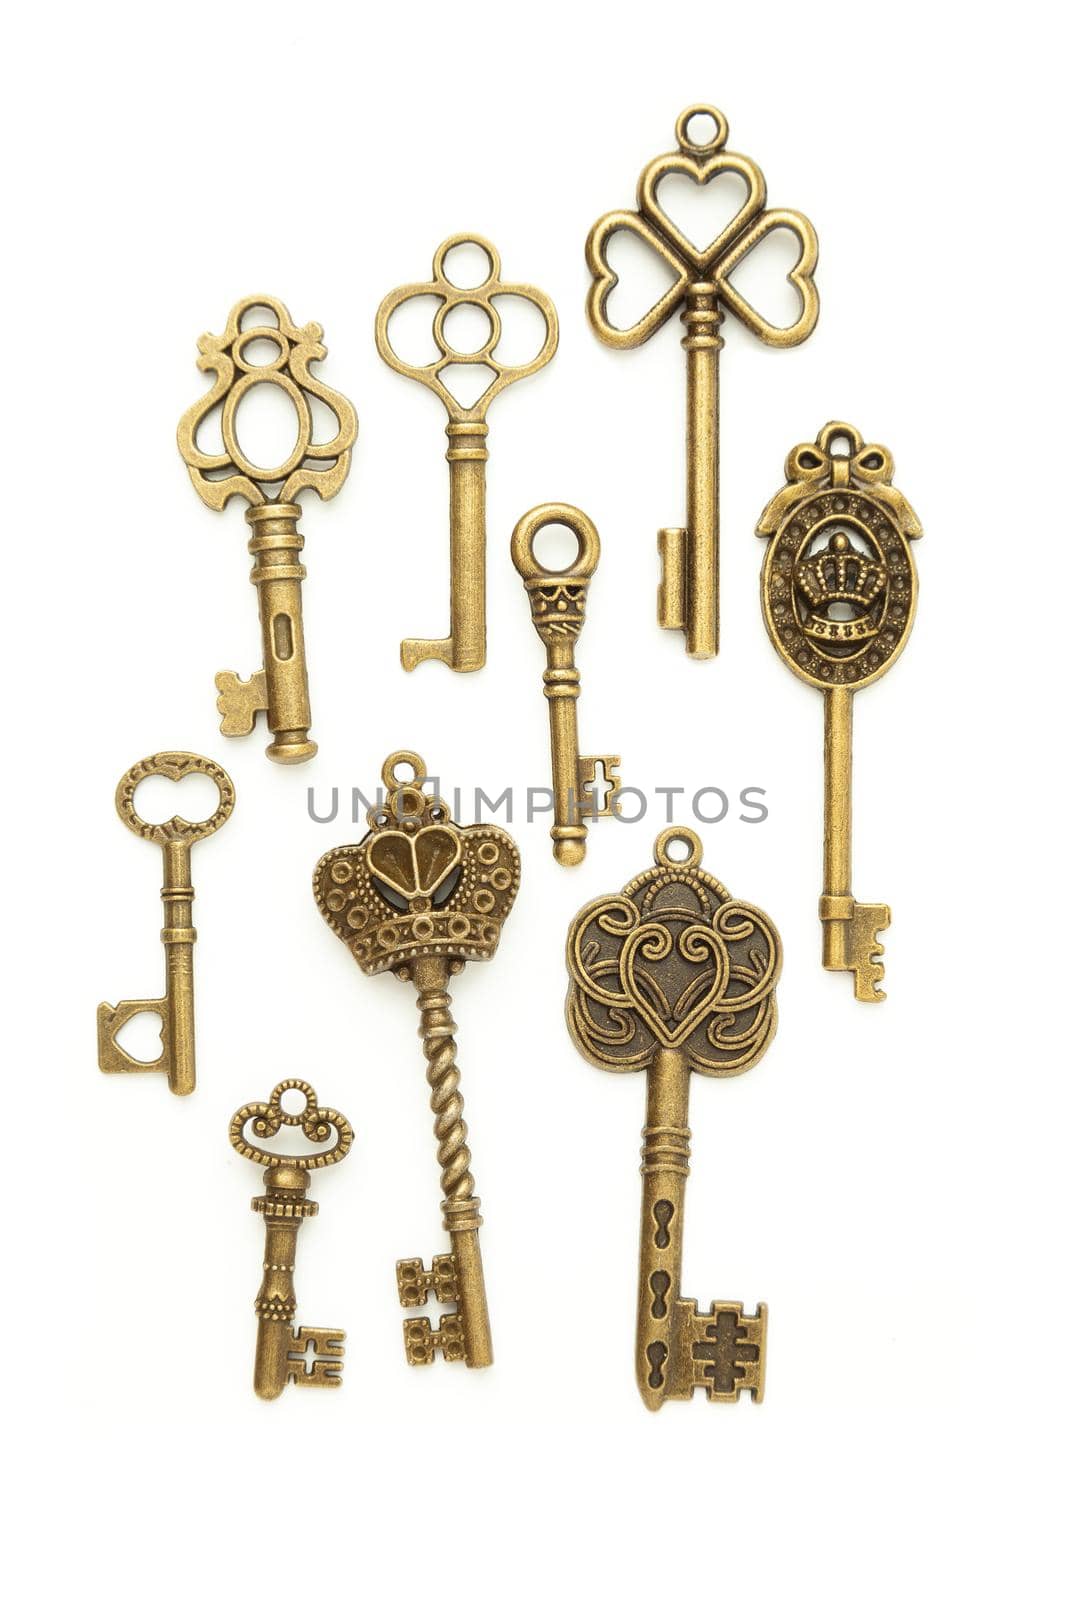 Vintage Keys Collection Isolated On White Background by SlayCer